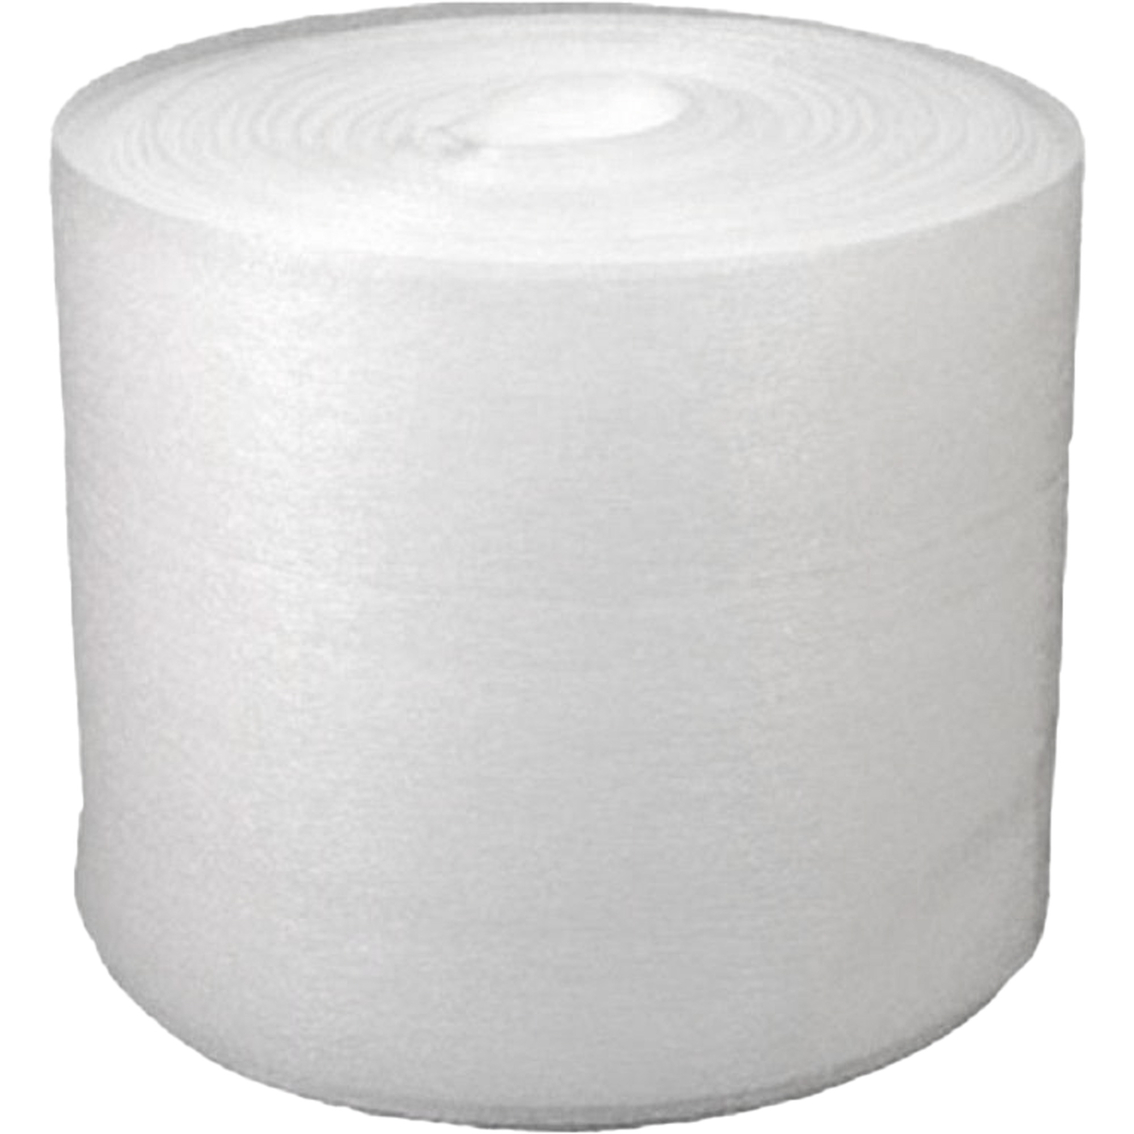 Uboxes Foam Wrap Roll 12 In. Wide X 150 Ft. 1/16 In. Thick, Mailing &  Shipping, Household